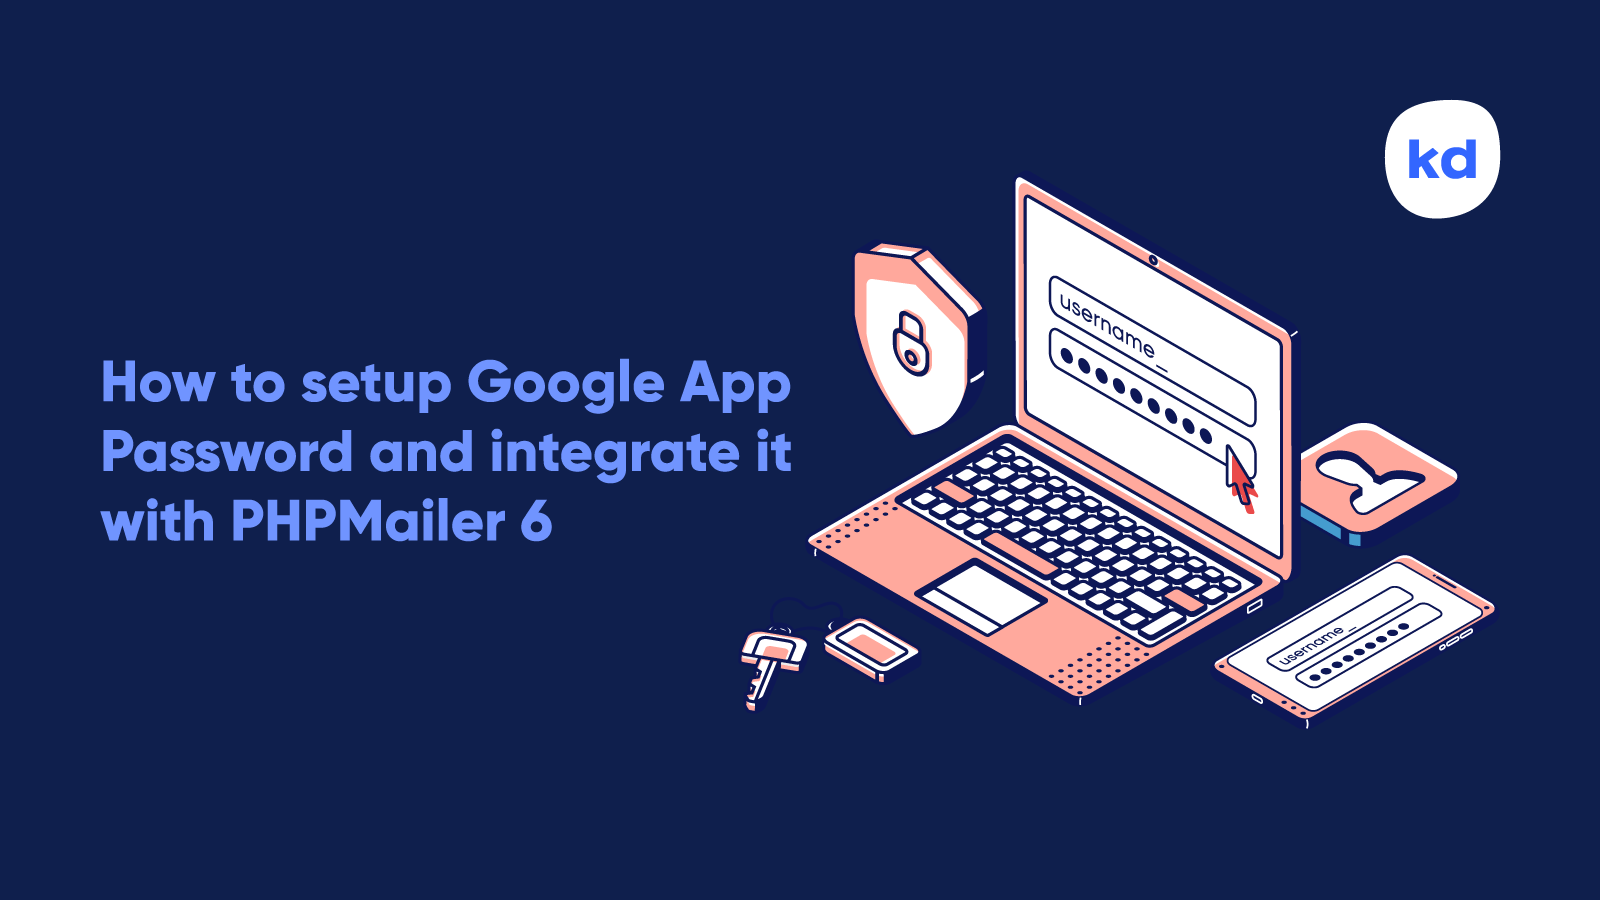 How to setup Google App Password and integrate it with PHPMailer 6.